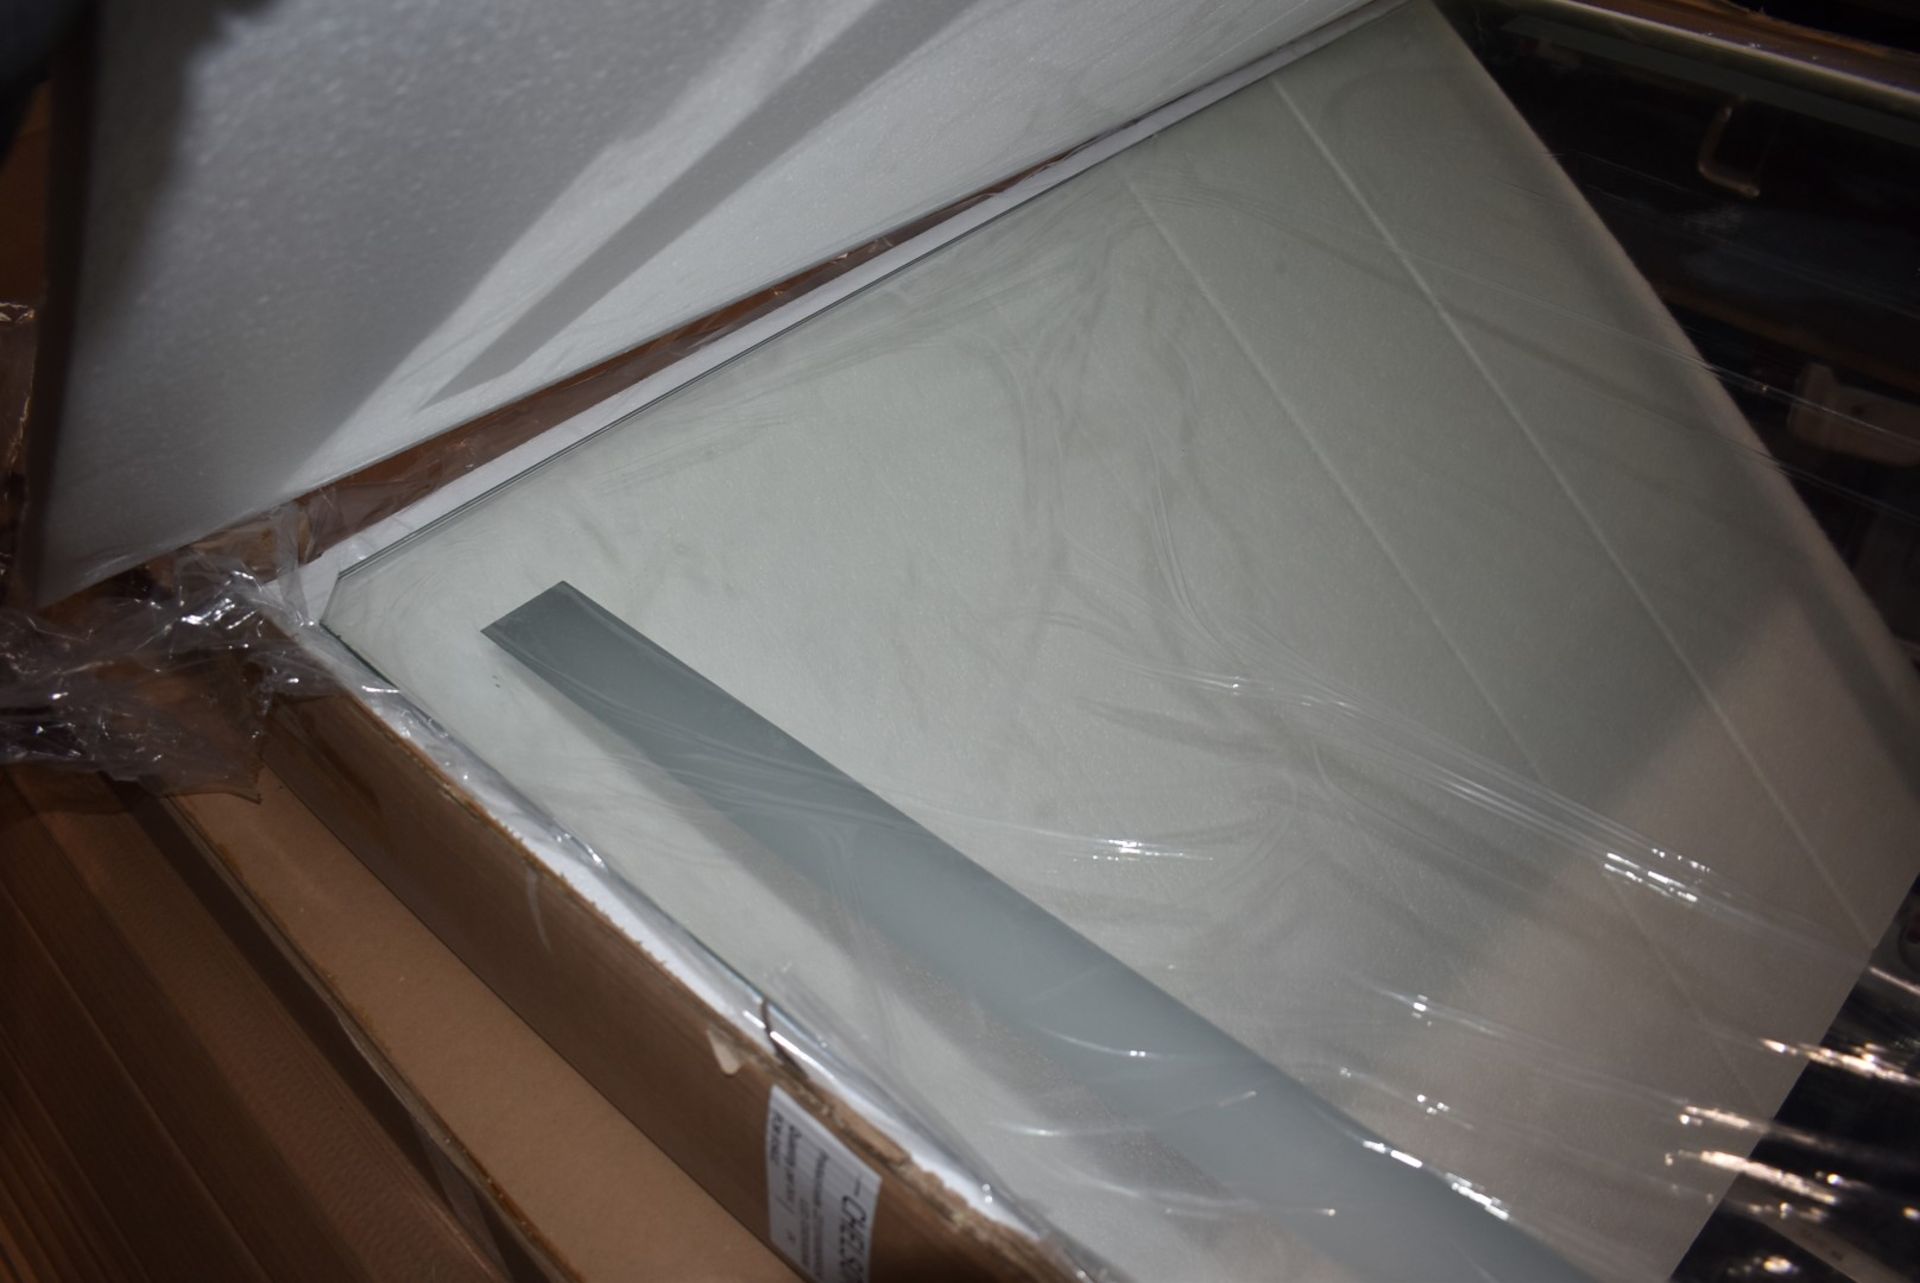 1 x Chelsom Large Illuminated LED Bathroom Mirror With Demister - Brand New Stock - As Used in Major - Image 3 of 10